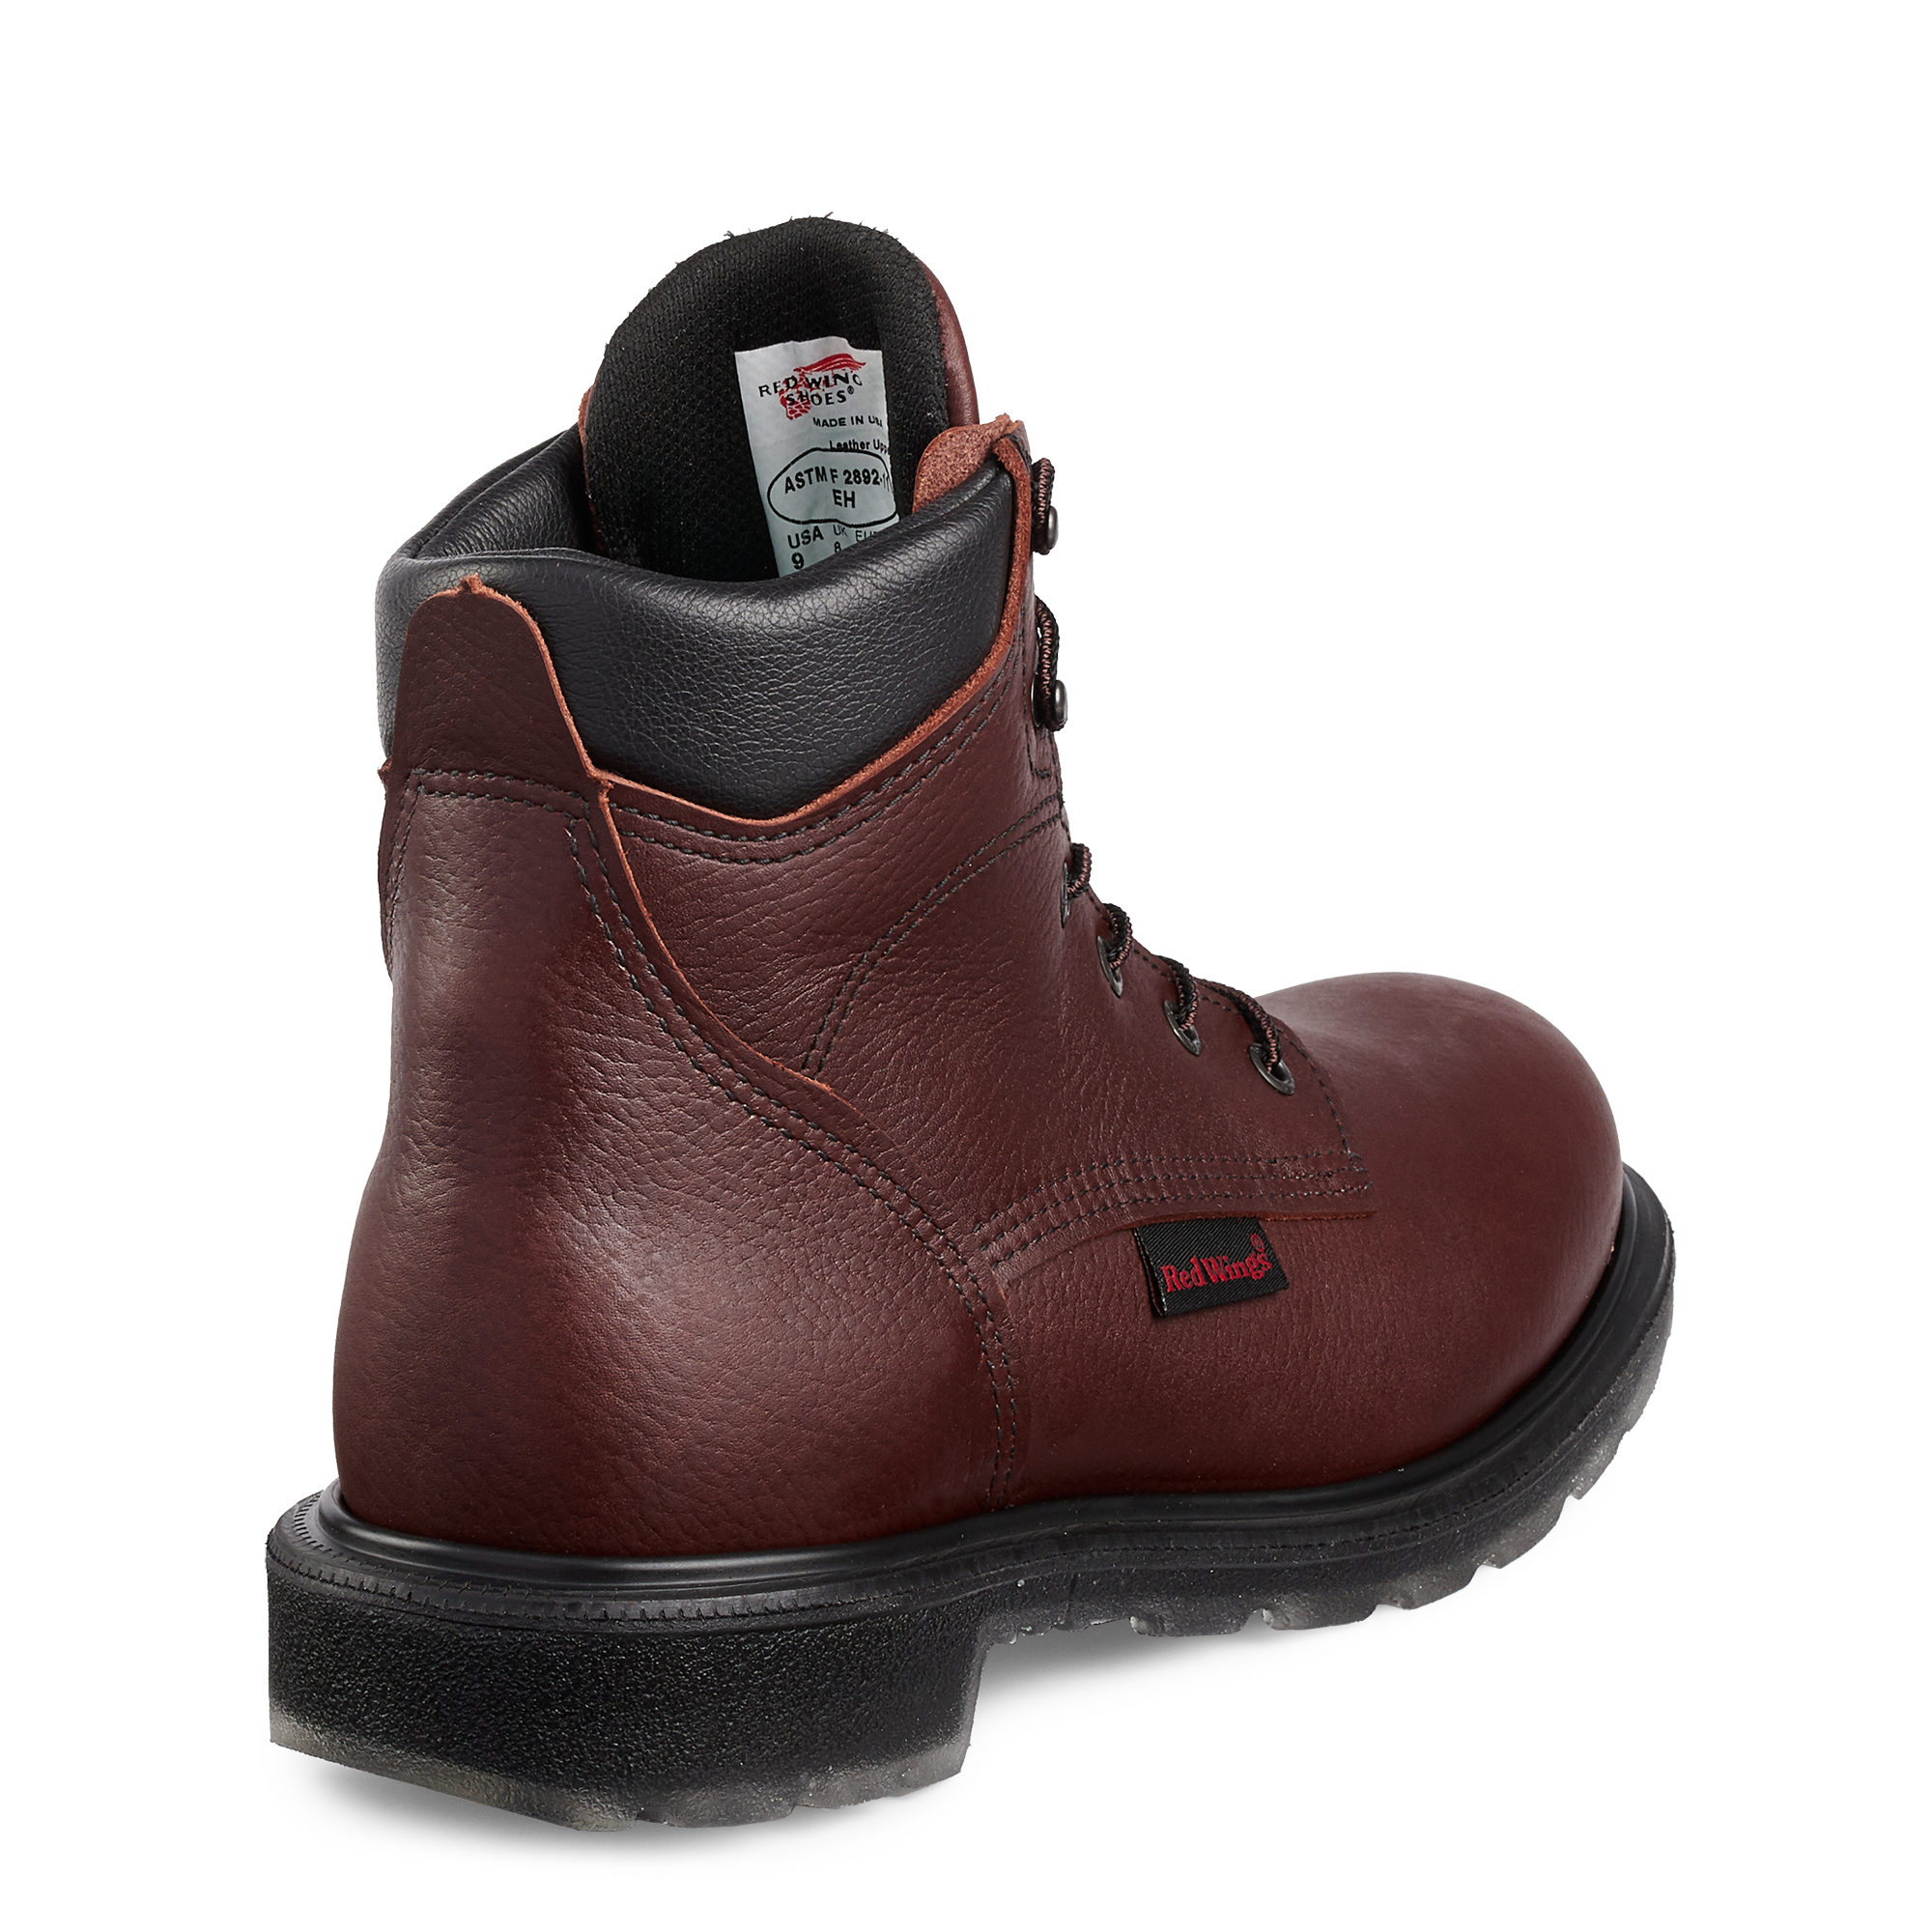 2406, Red Wing 2406, 2406 Toe Boots, 2406 Work Boots – Baker Shoes